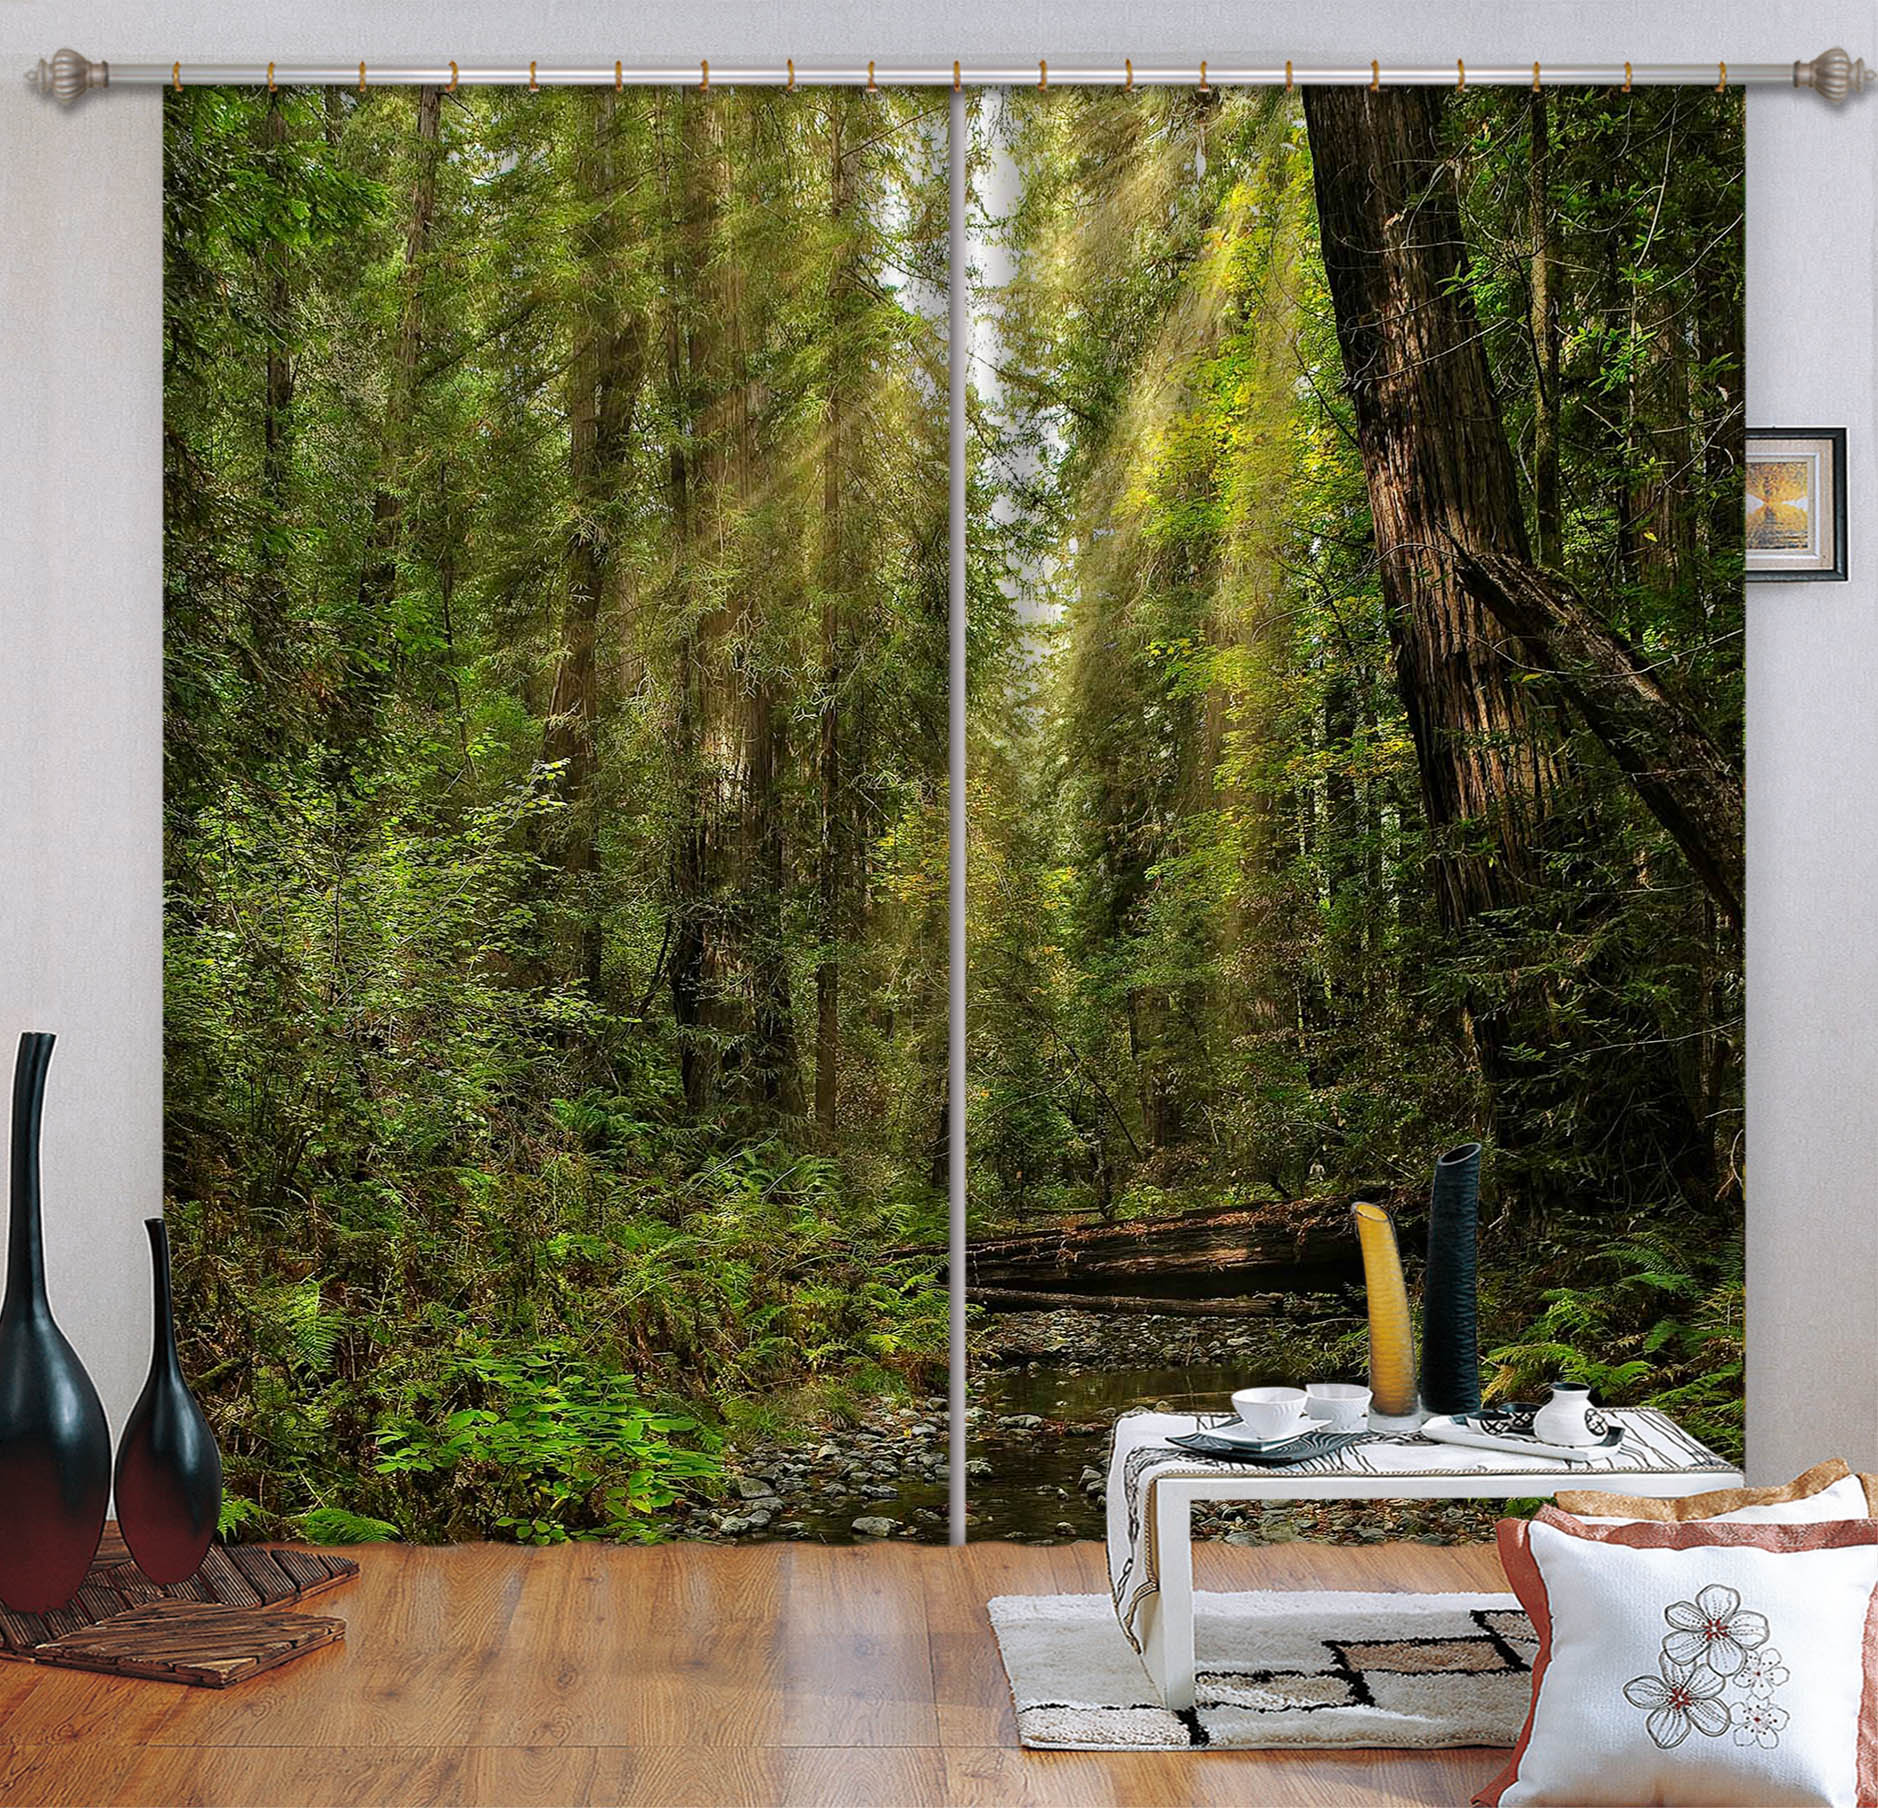 3D Forest Stream 61219 Kathy Barefield Curtain Curtains Drapes